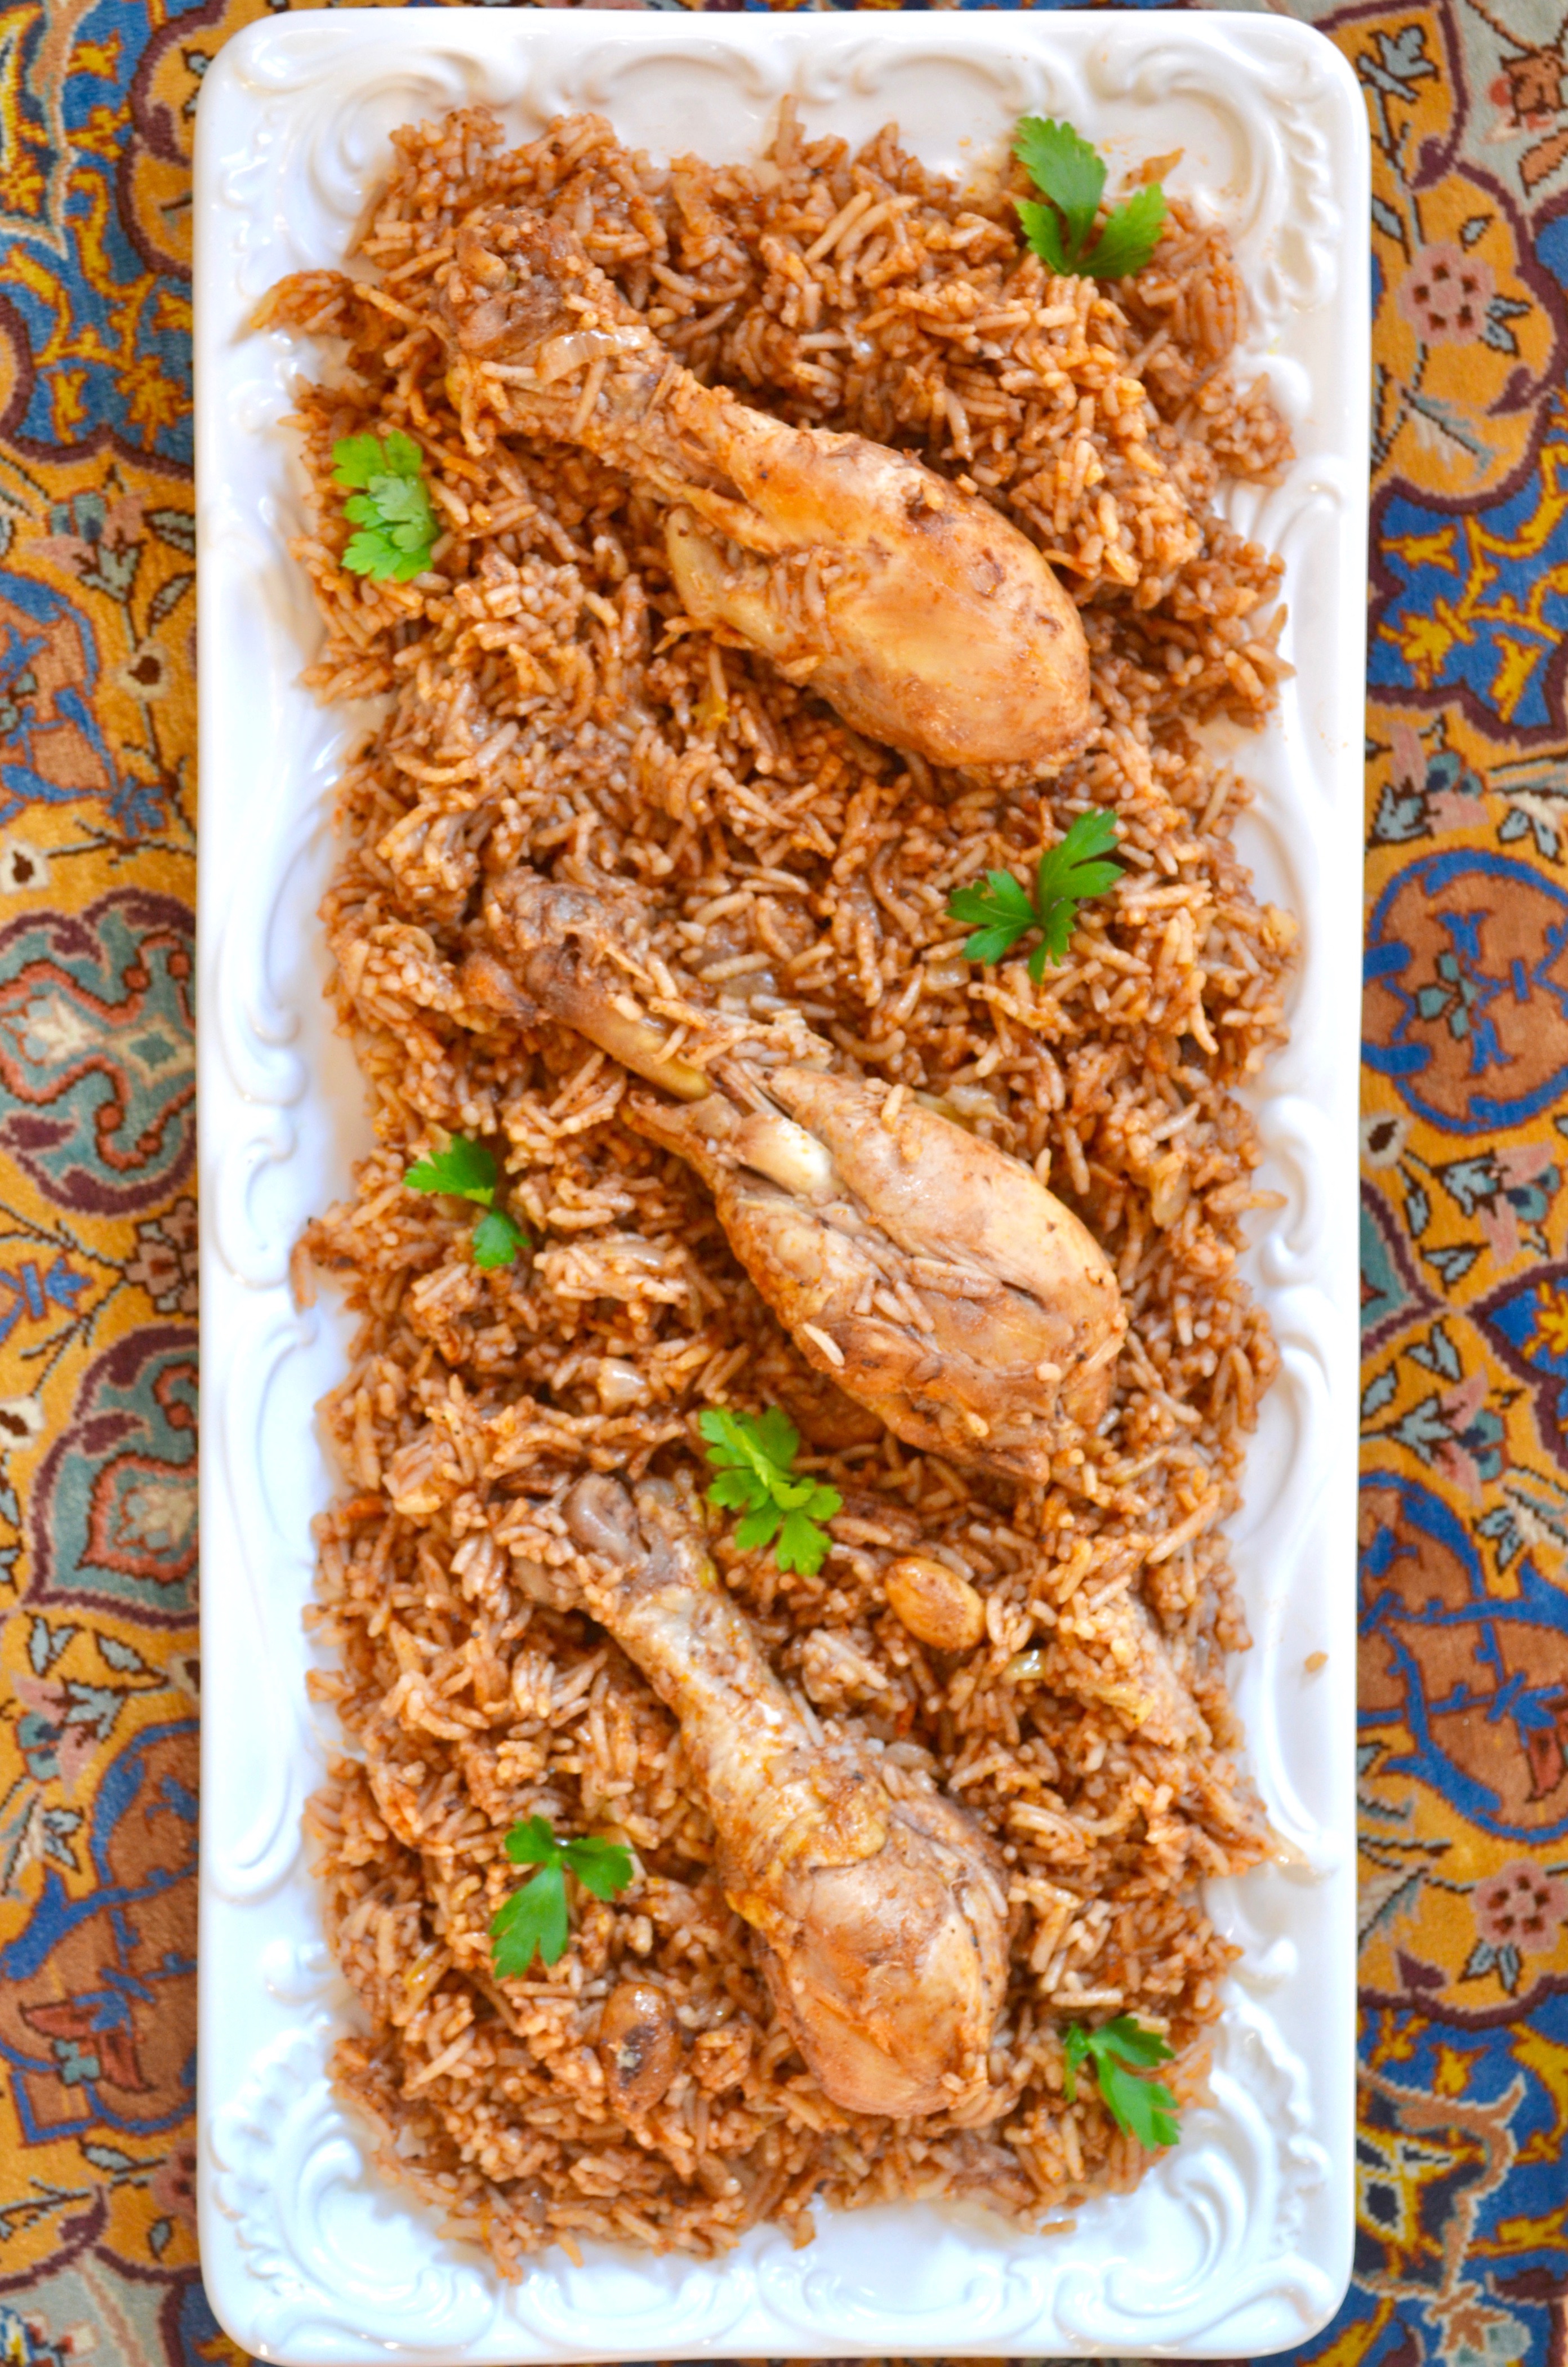 Middle Eastern Spiced Rice and Chicken - Measuring Cups, Optional